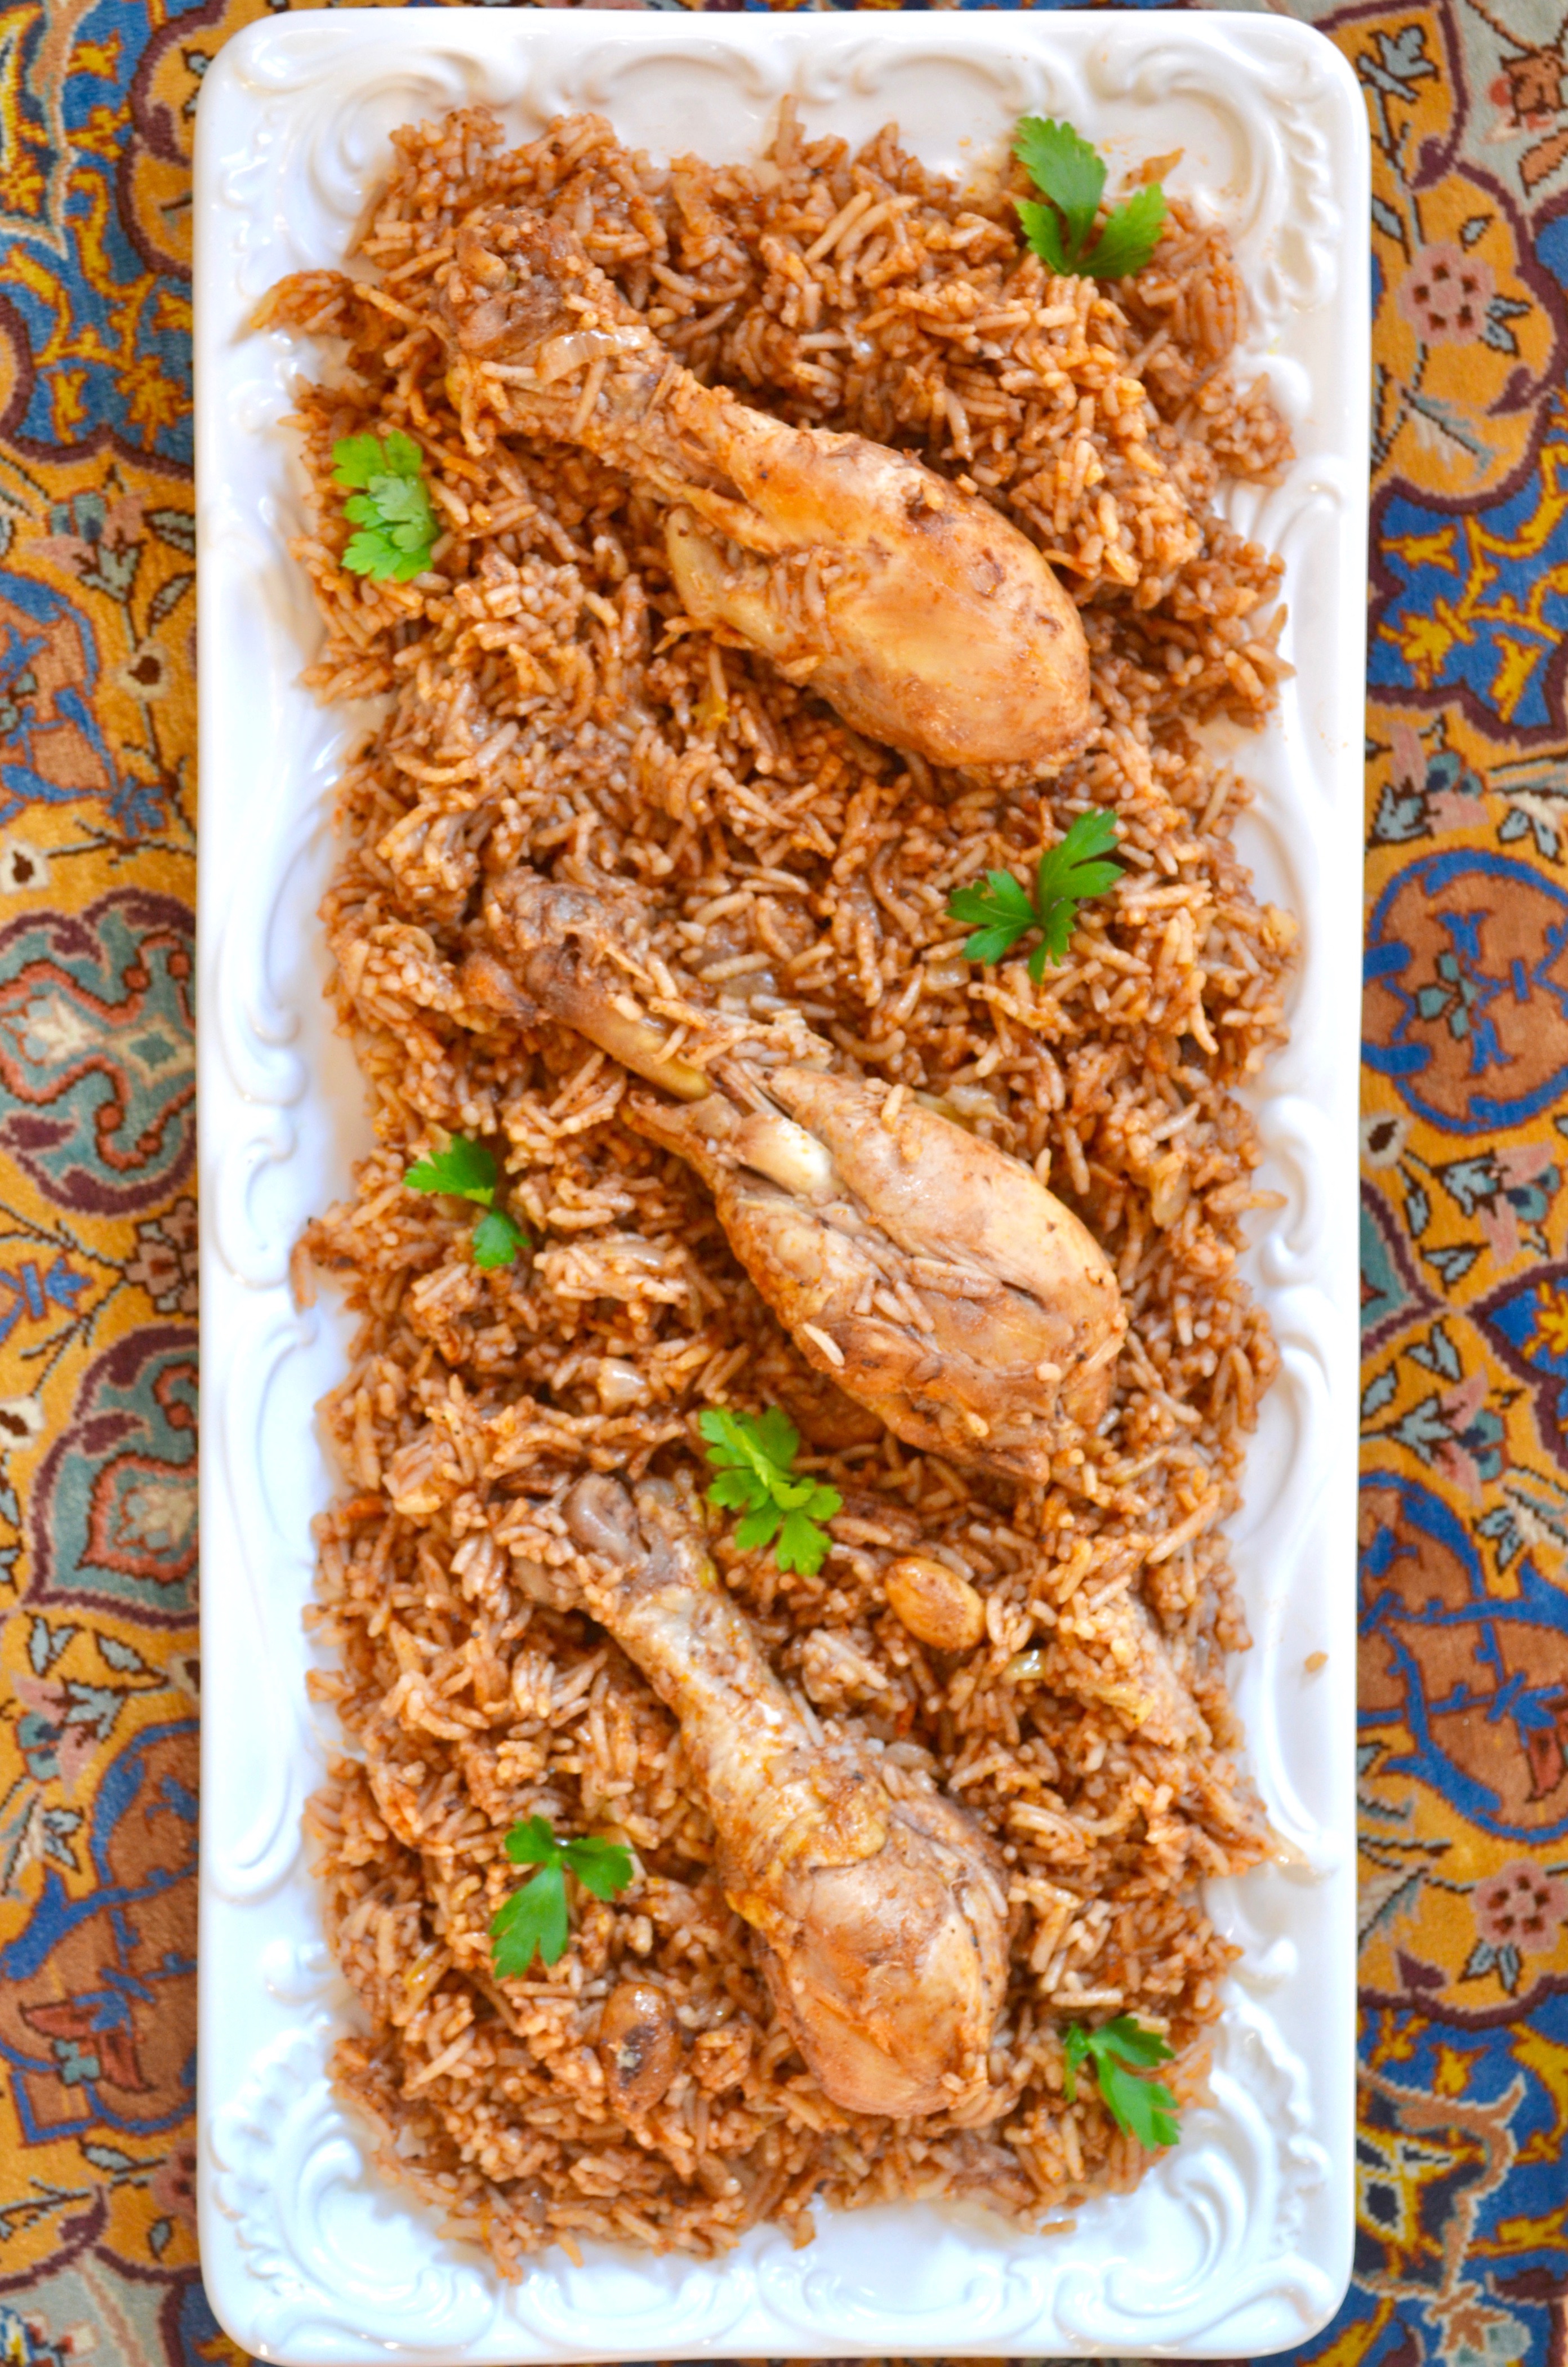 Middle Eastern Spiced Rice and Chicken - Measuring Cups, Optional